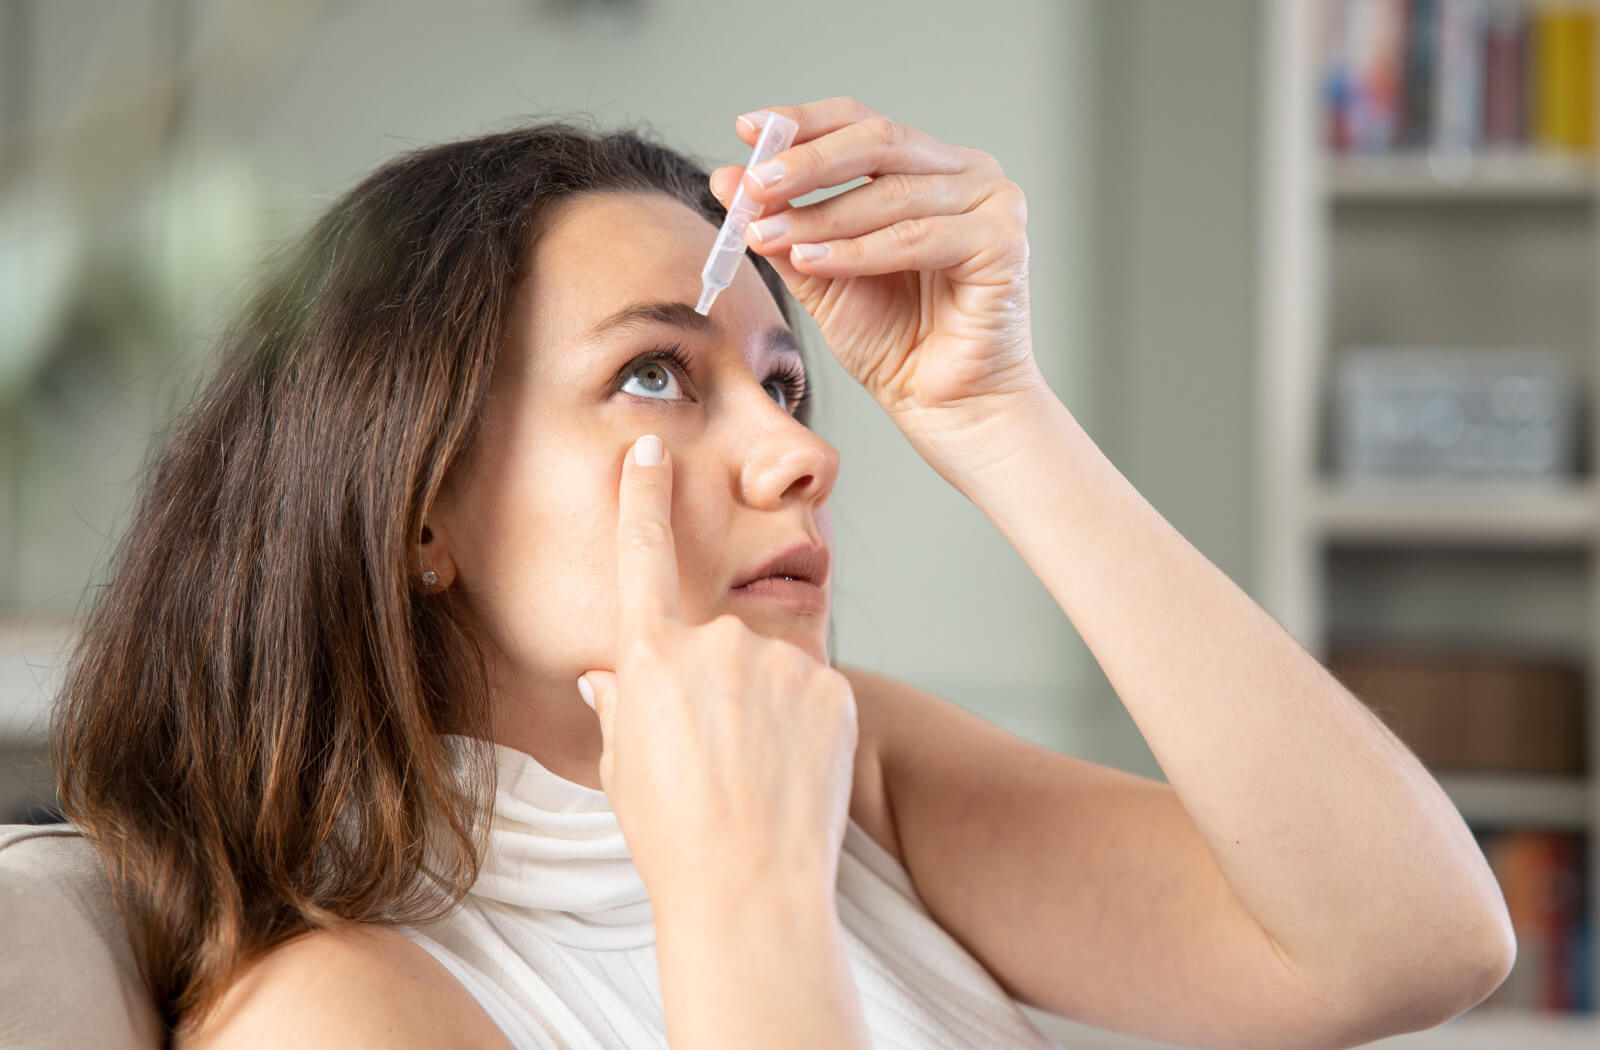 A woman applying eye drops on her right eye to alleviate eye dryness.